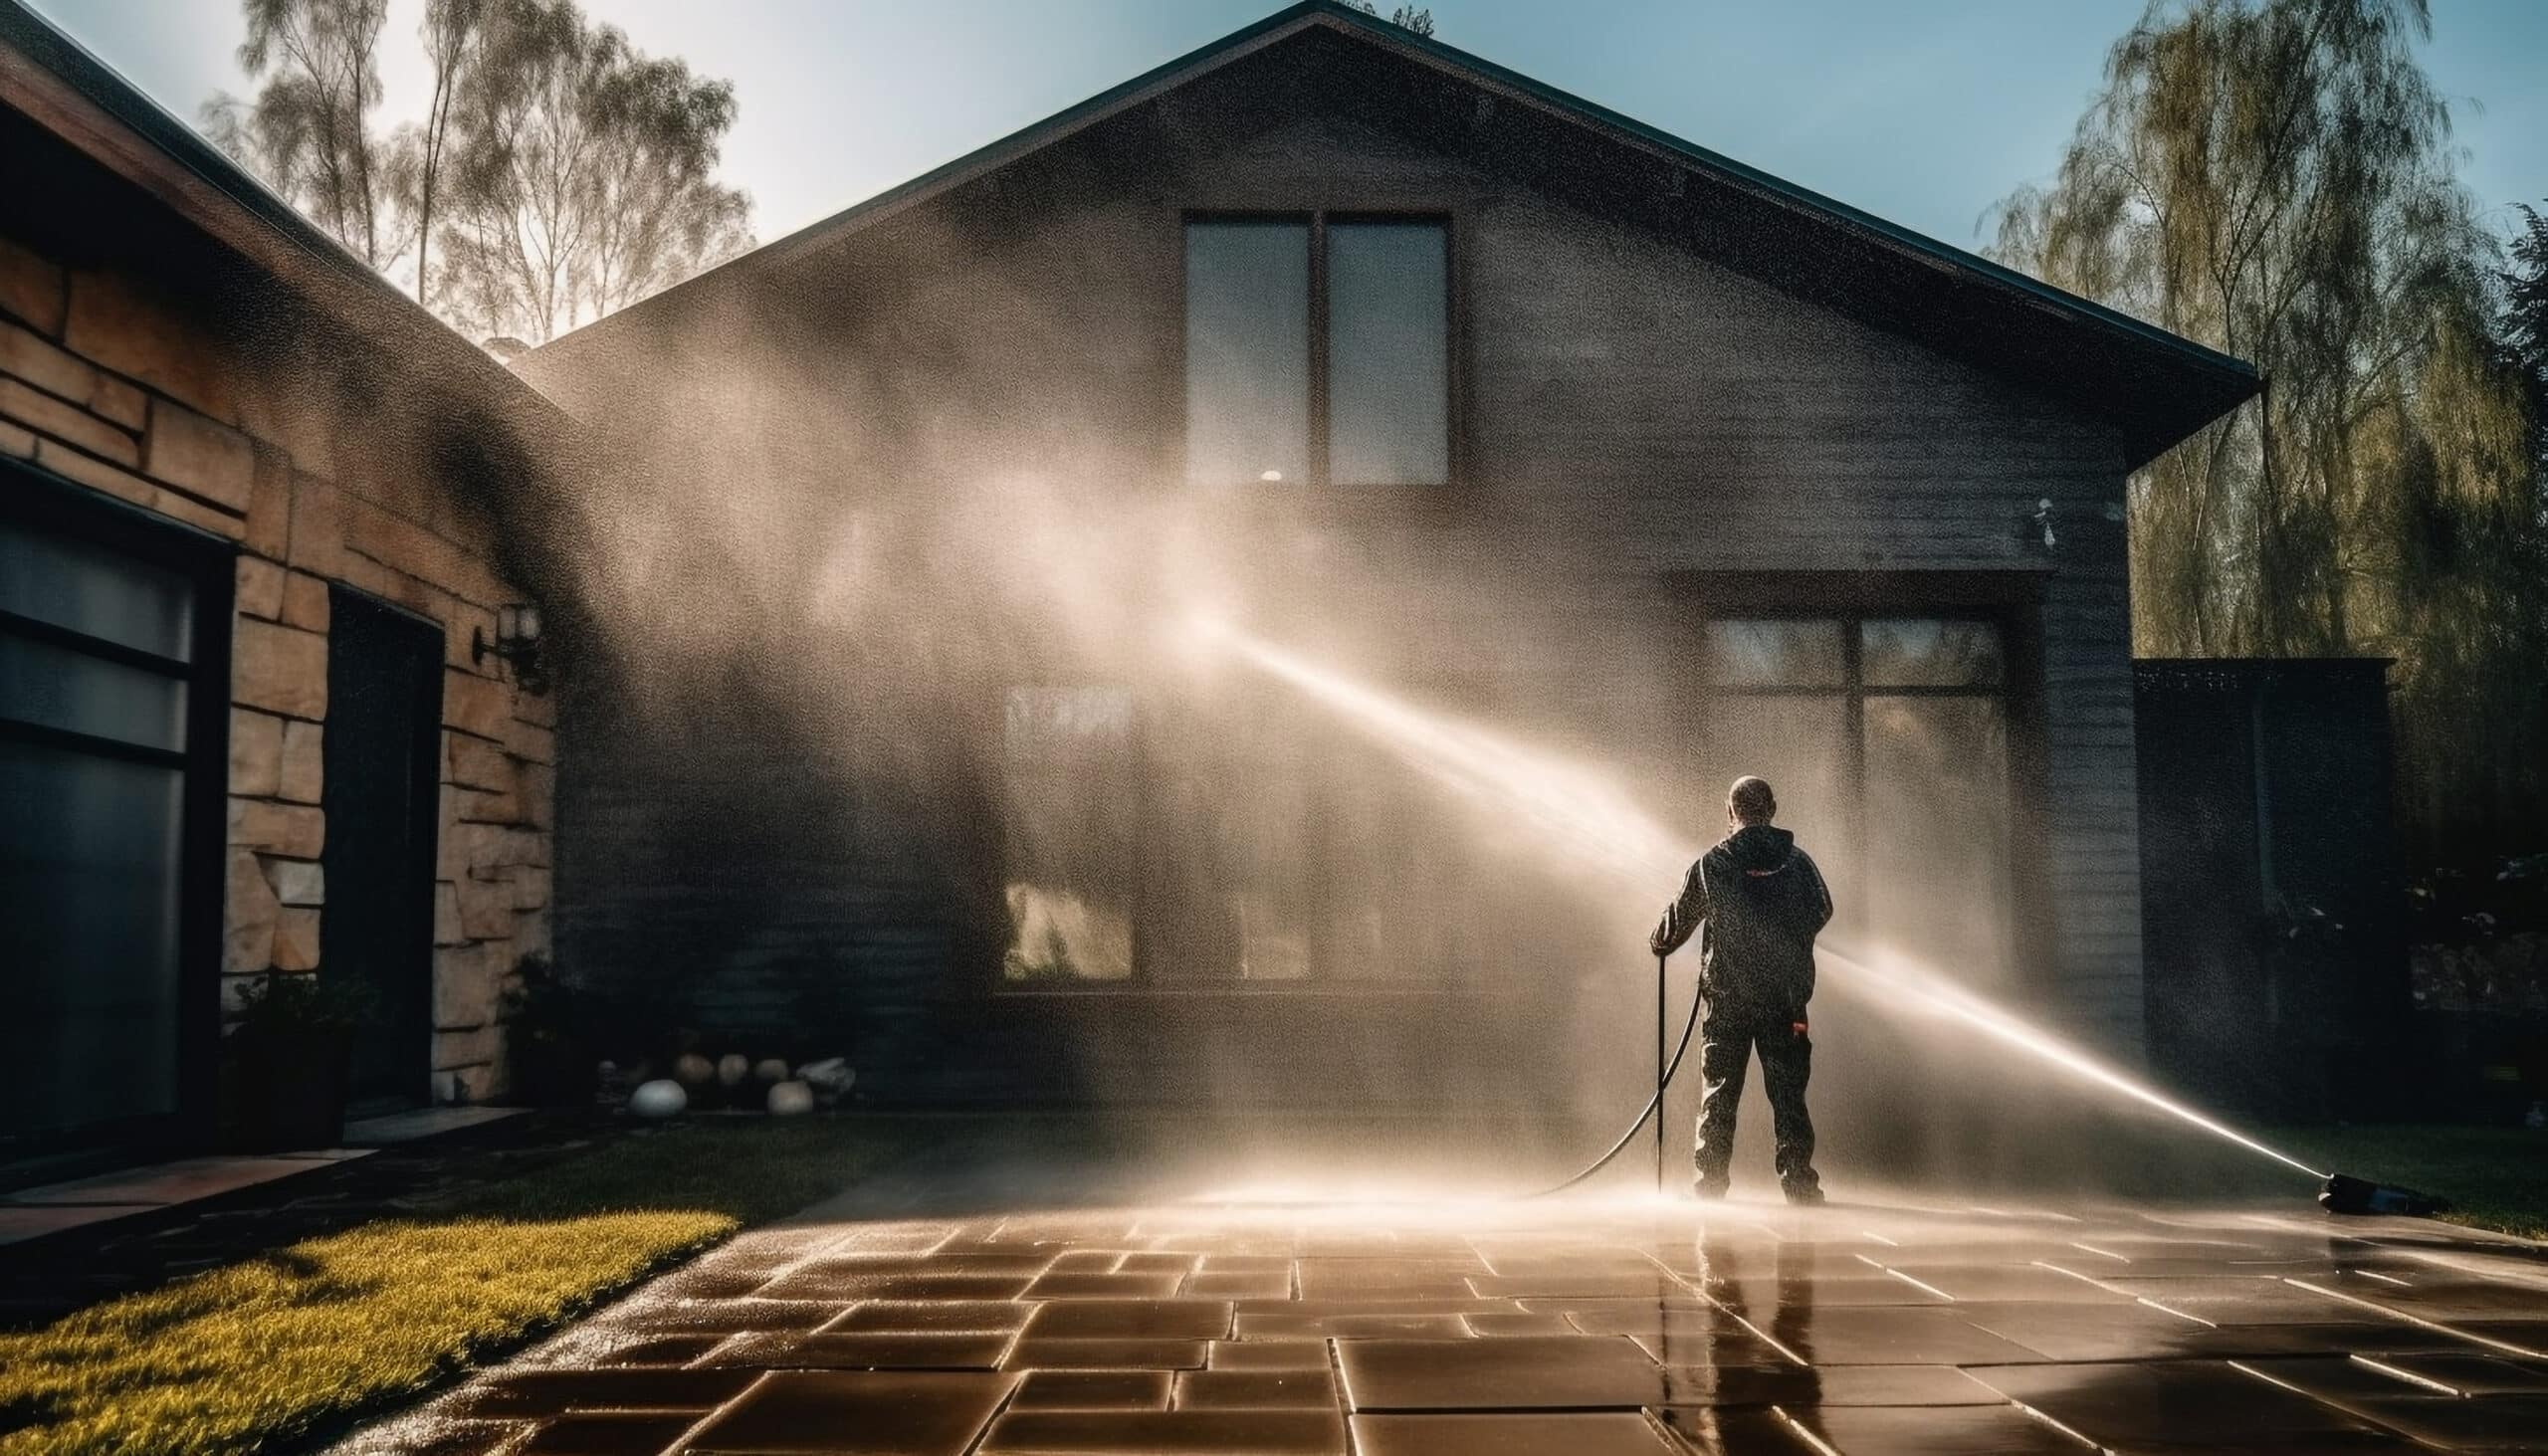 www.appr.com : Can I use a gasoline-powered pressure washer indoors?